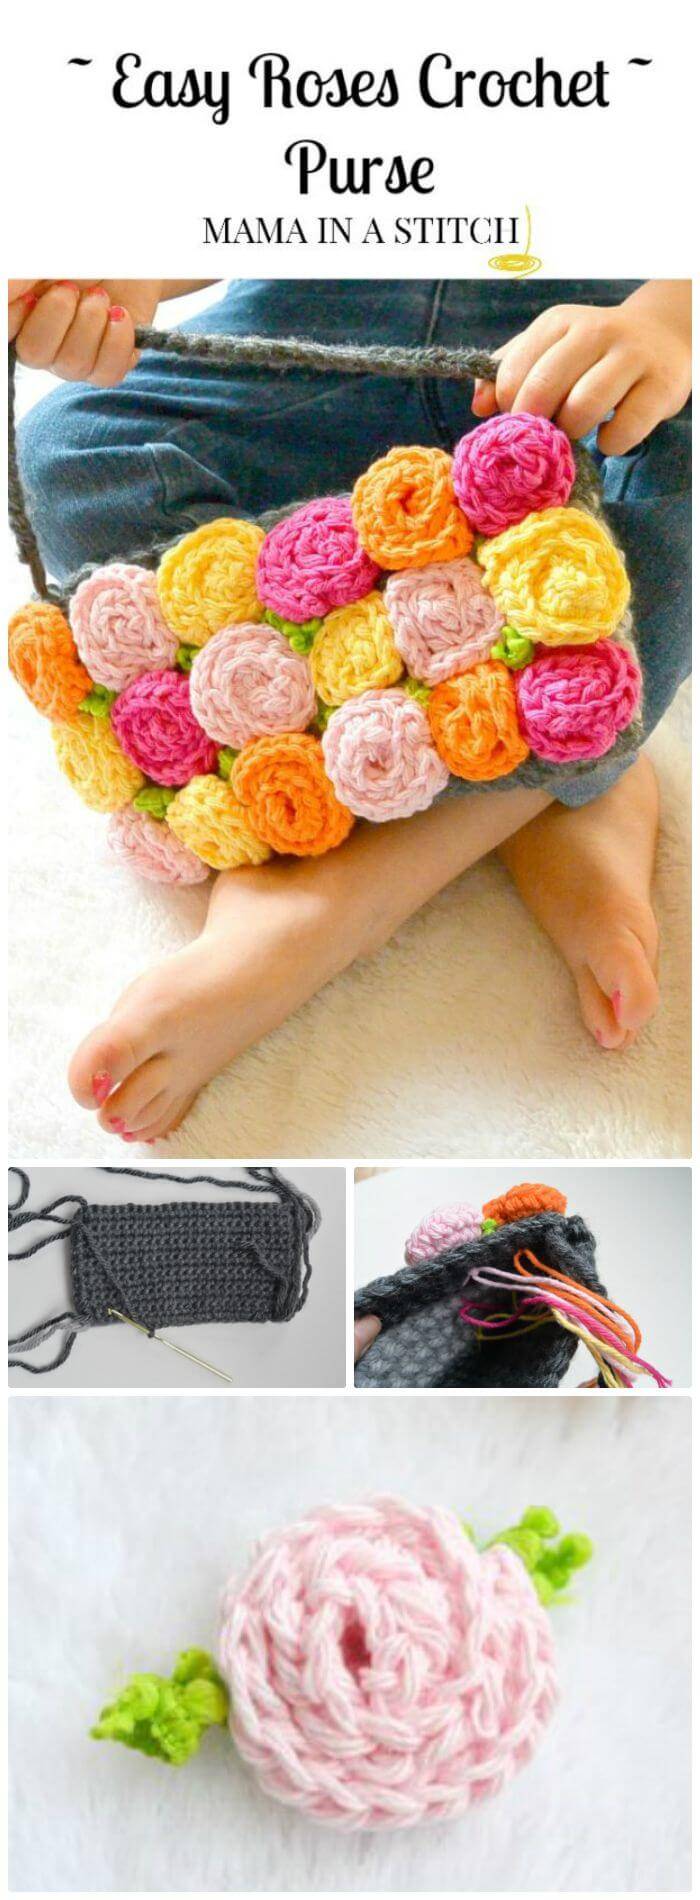 DIY Simple Roses Crochet Purse, Super easy and free crochet flower patterns! Easy crochet flower tutorials for beginners!